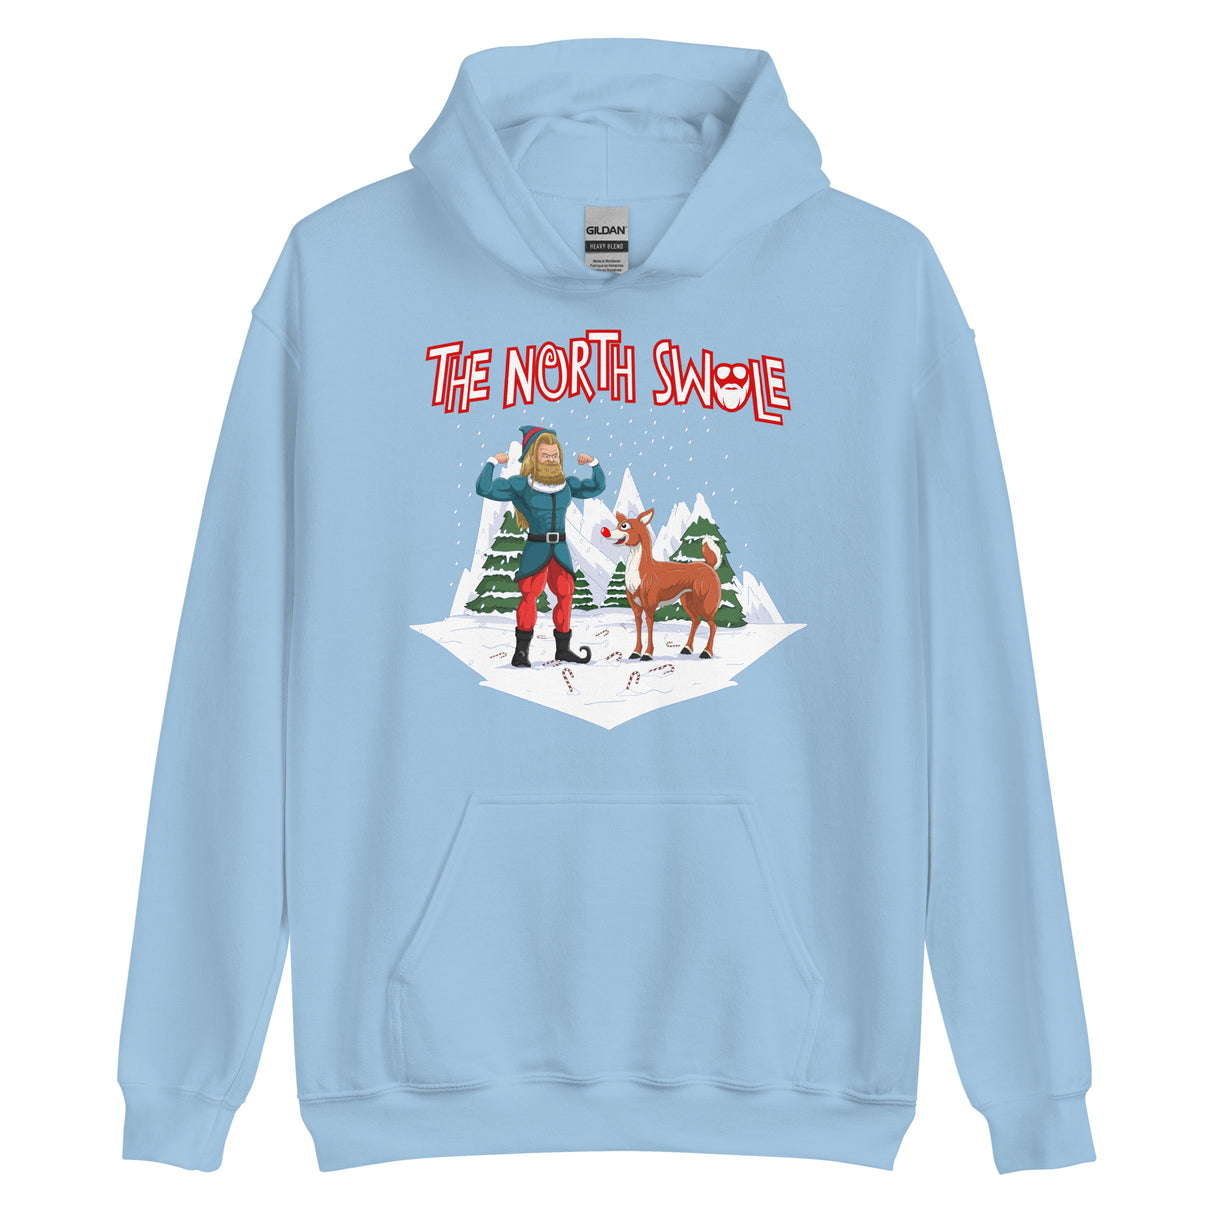 The North Swole Hoodie